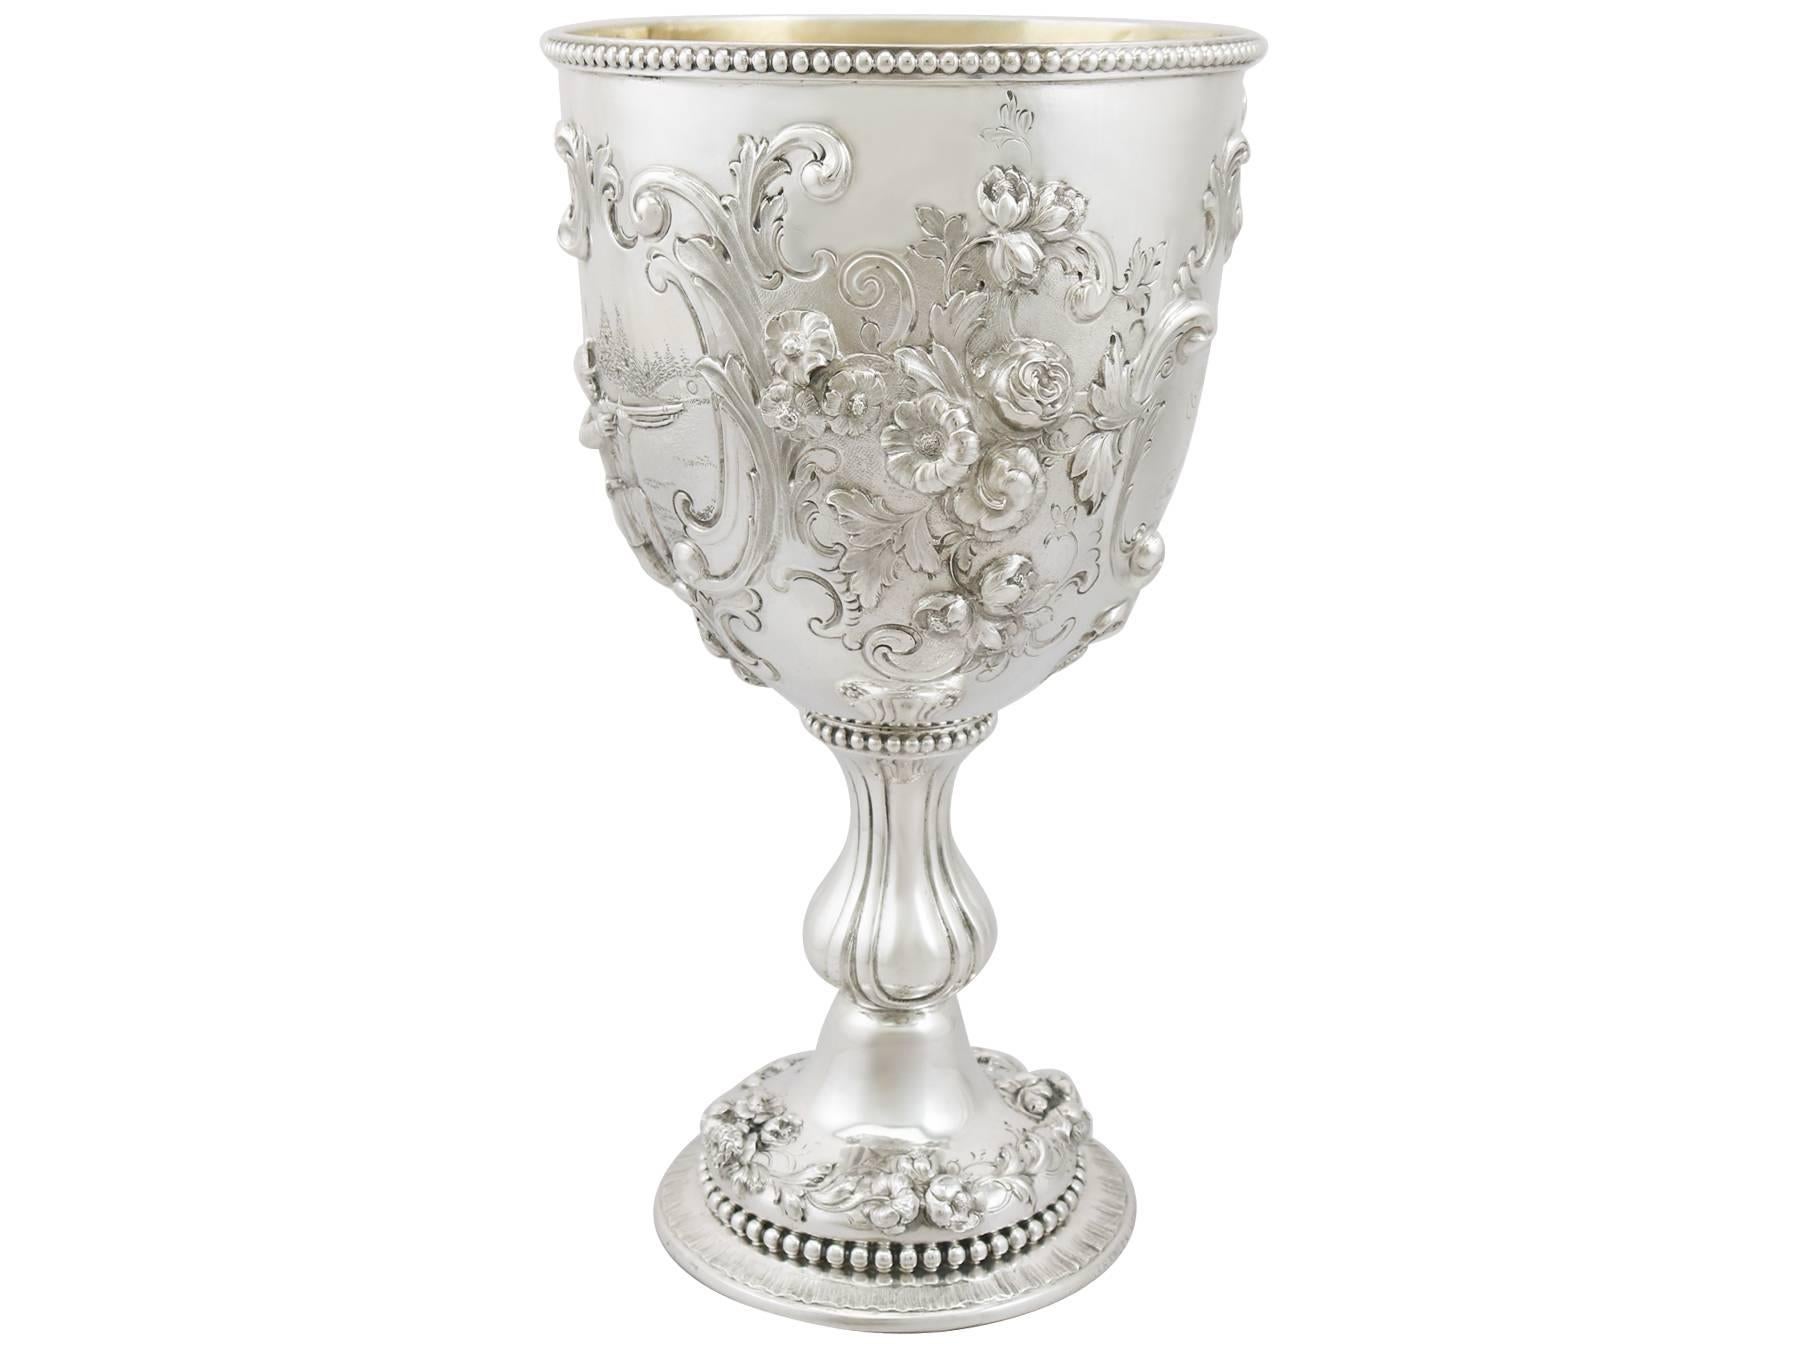 A magnificent, fine and impressive, large antique Victorian English sterling silver presentation cup; an addition to our presentation silverware collection.

This magnificent antique sterling silver cup has a circular bell shaped form to a bulbous